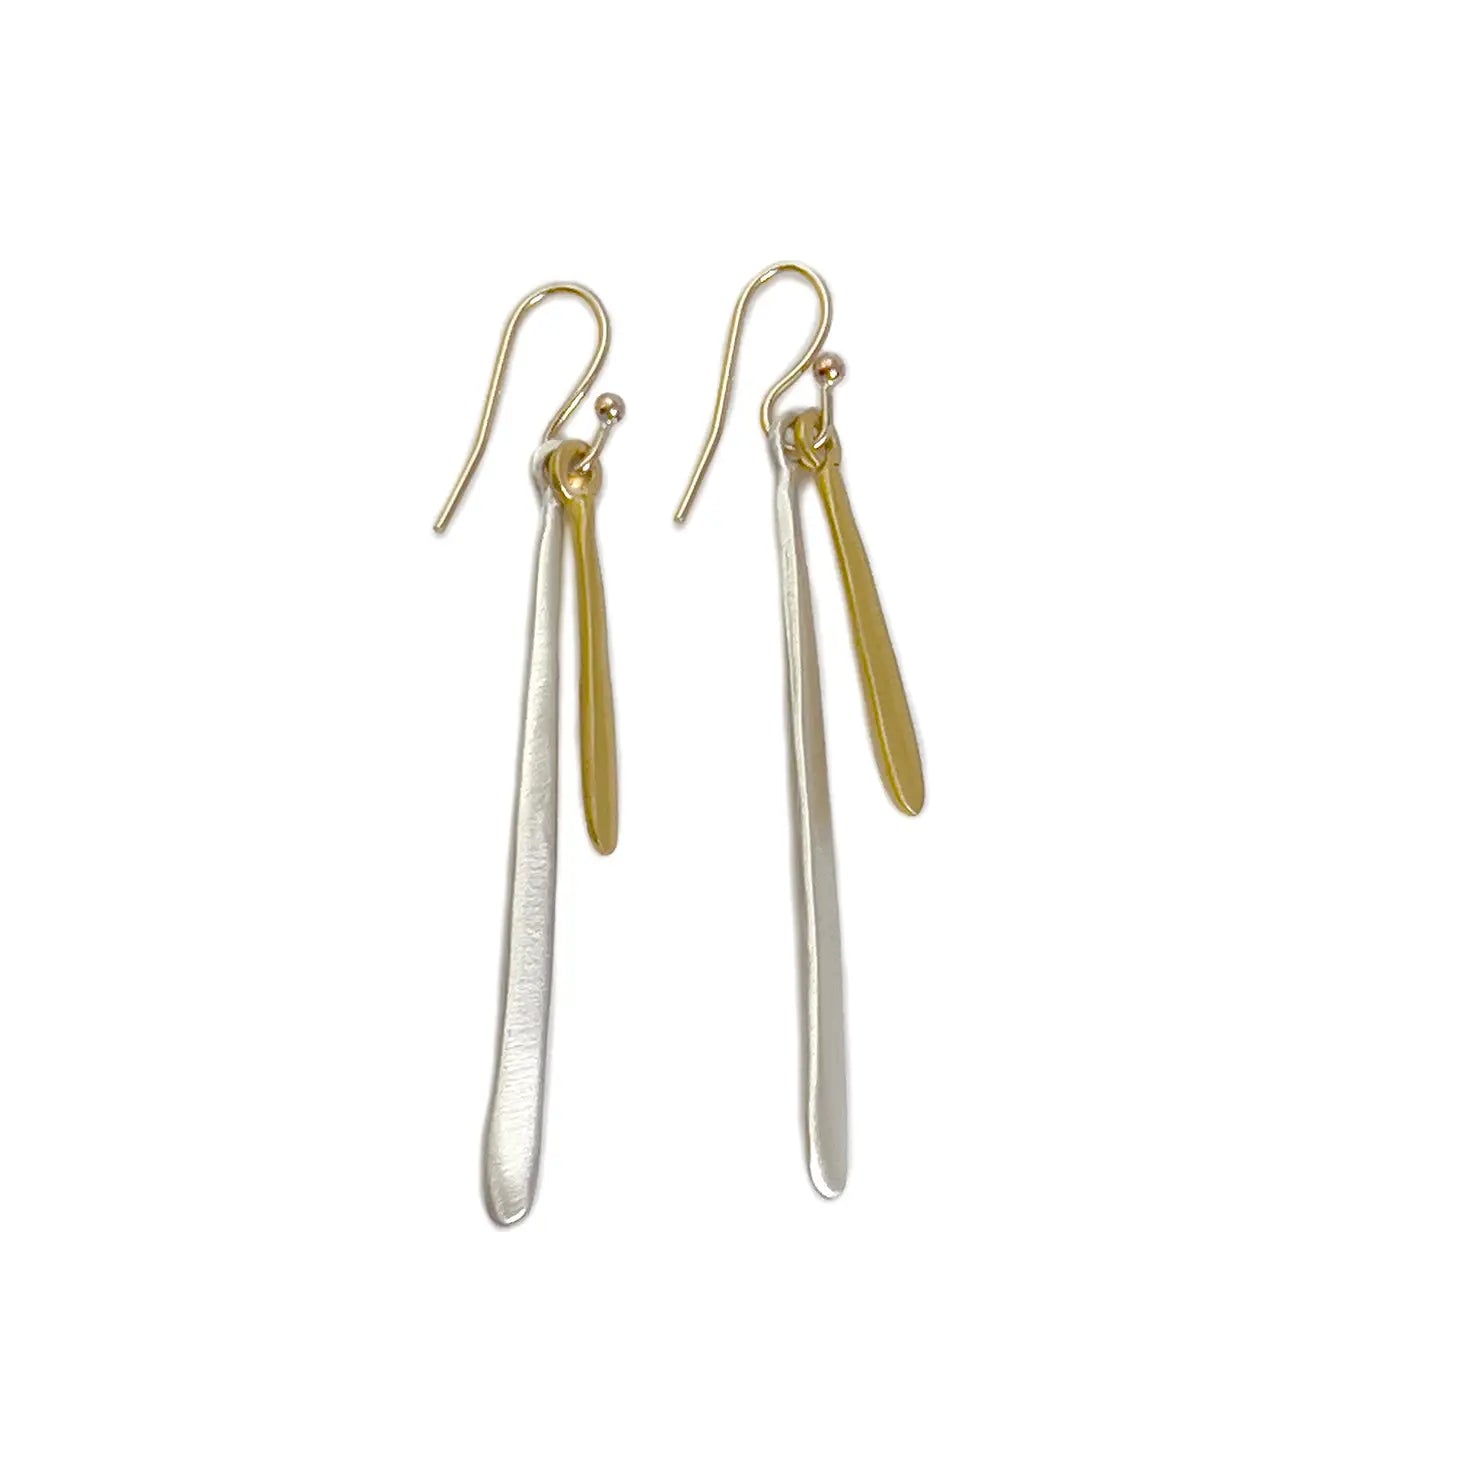 Two Needle Earrings in Silver and Gold Vermeil – PINCH